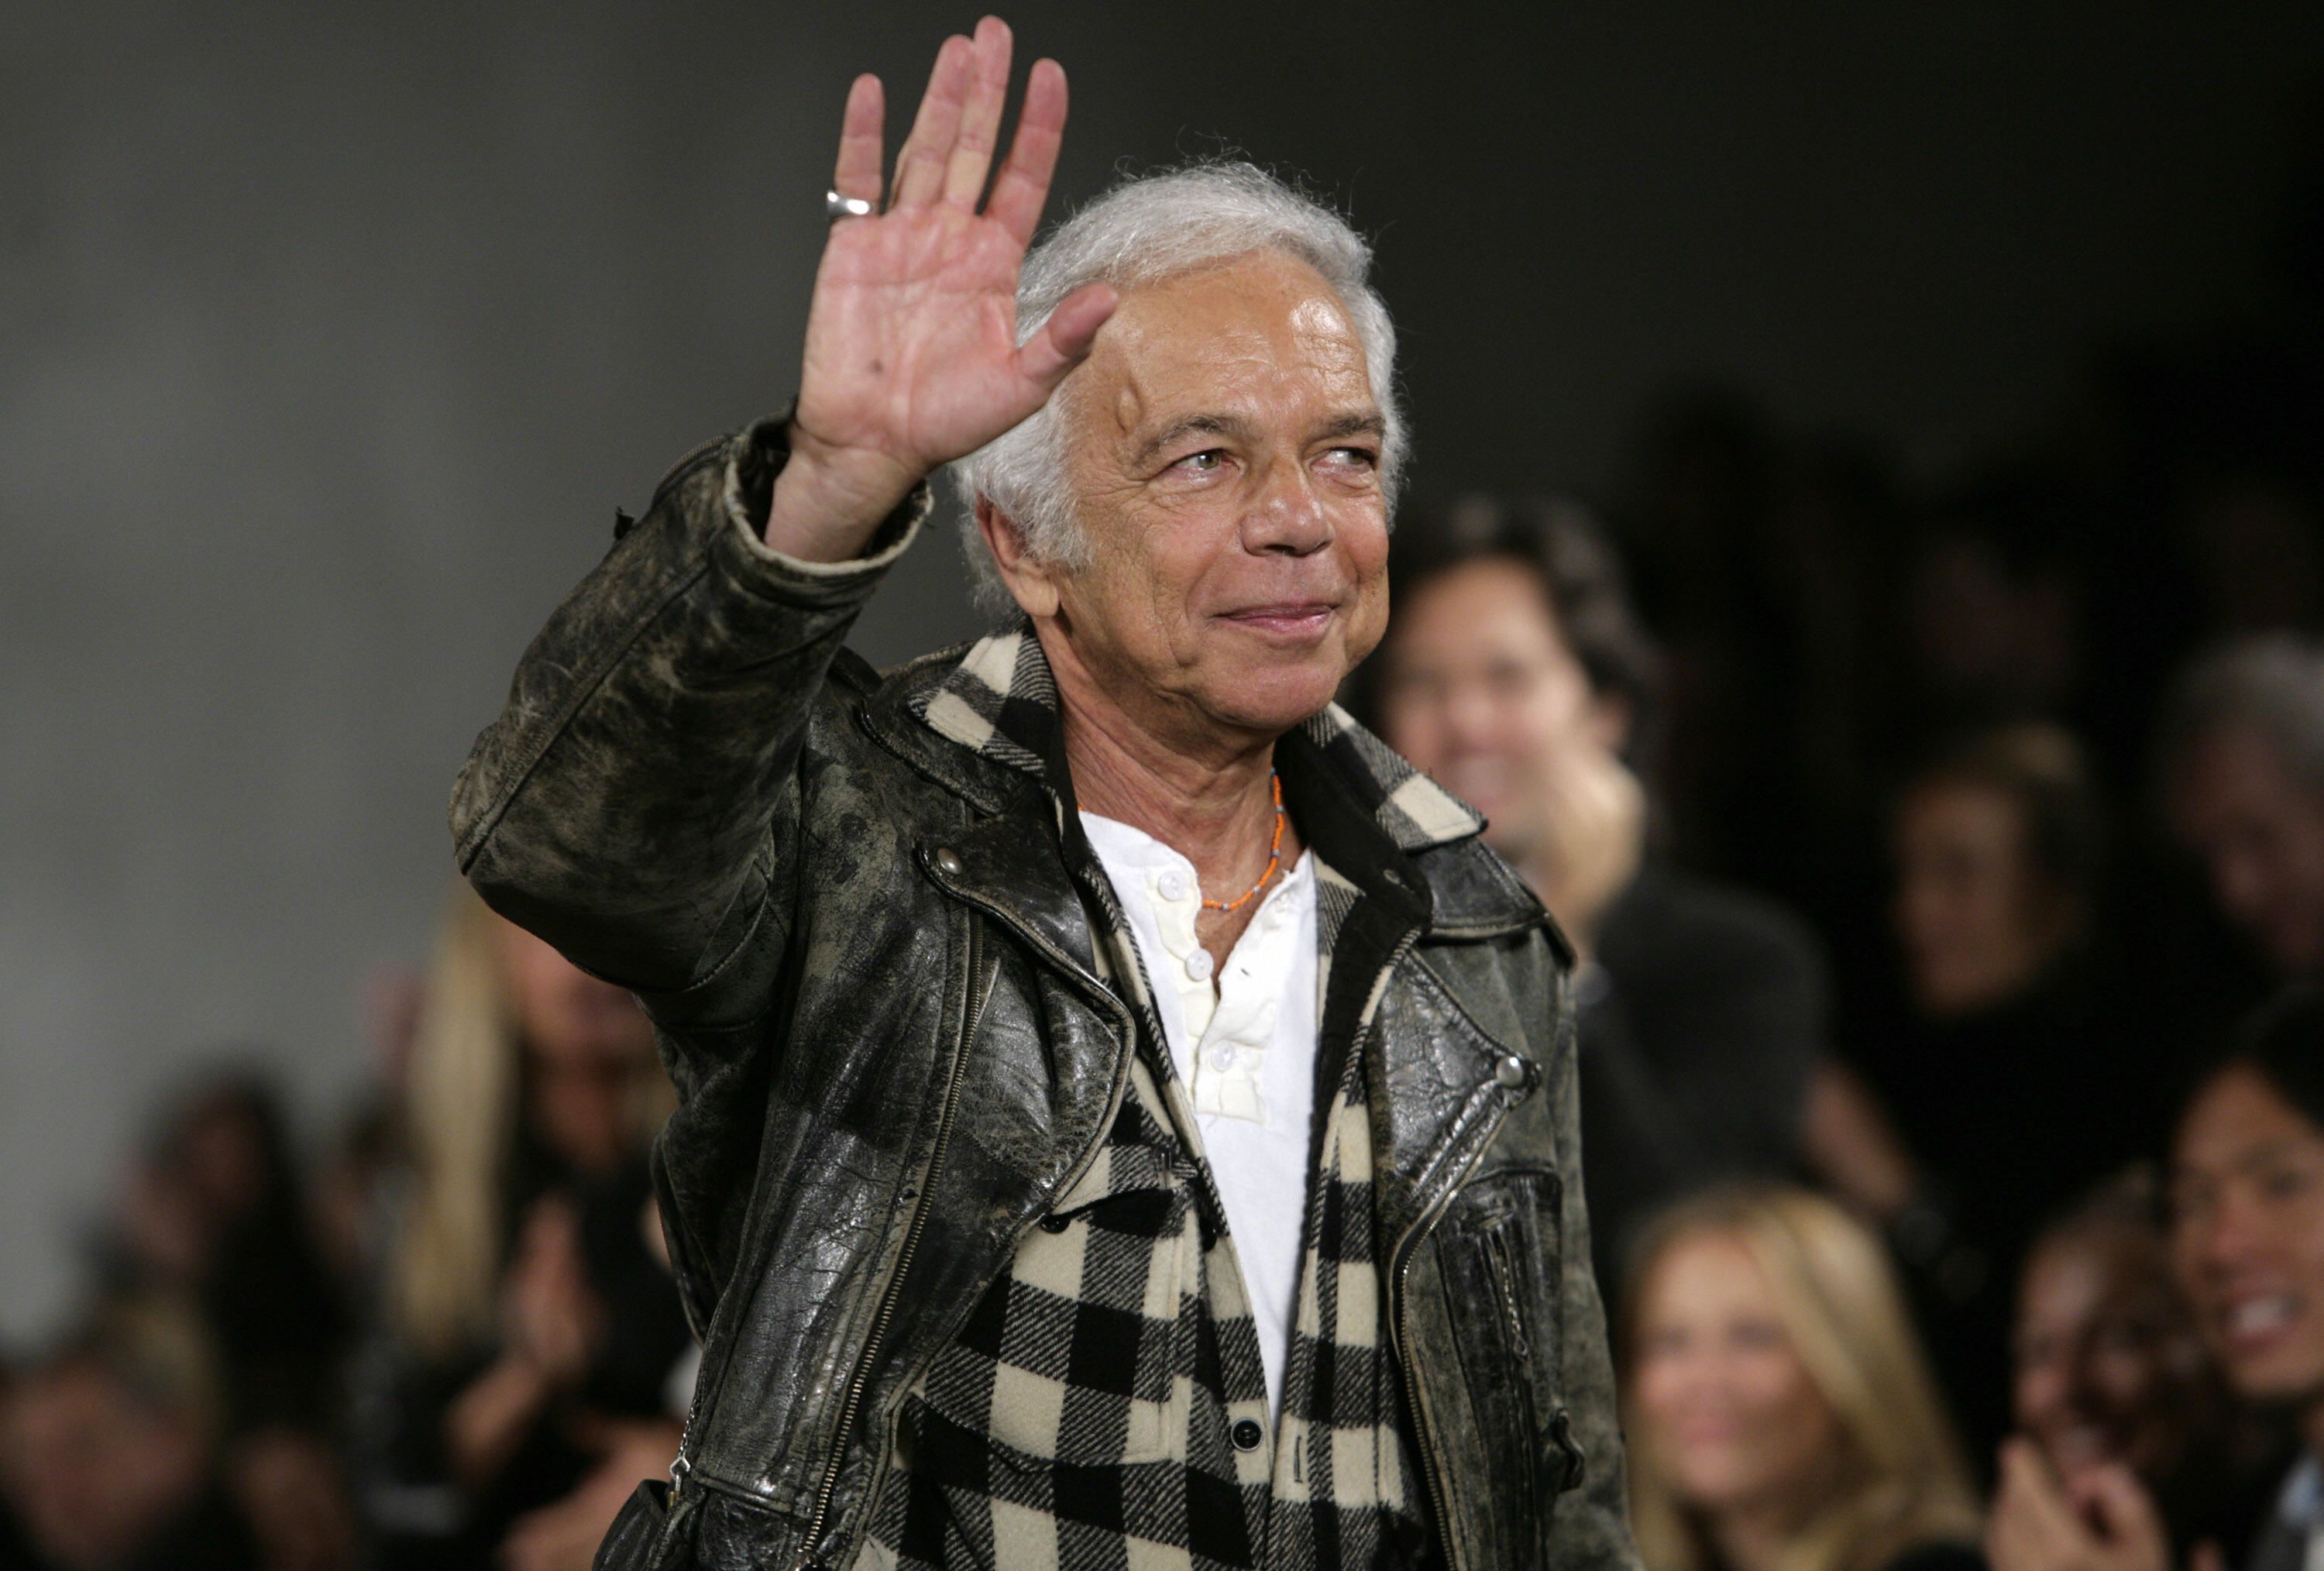 Ralph Lauren to become first American designer knighted by the Queen